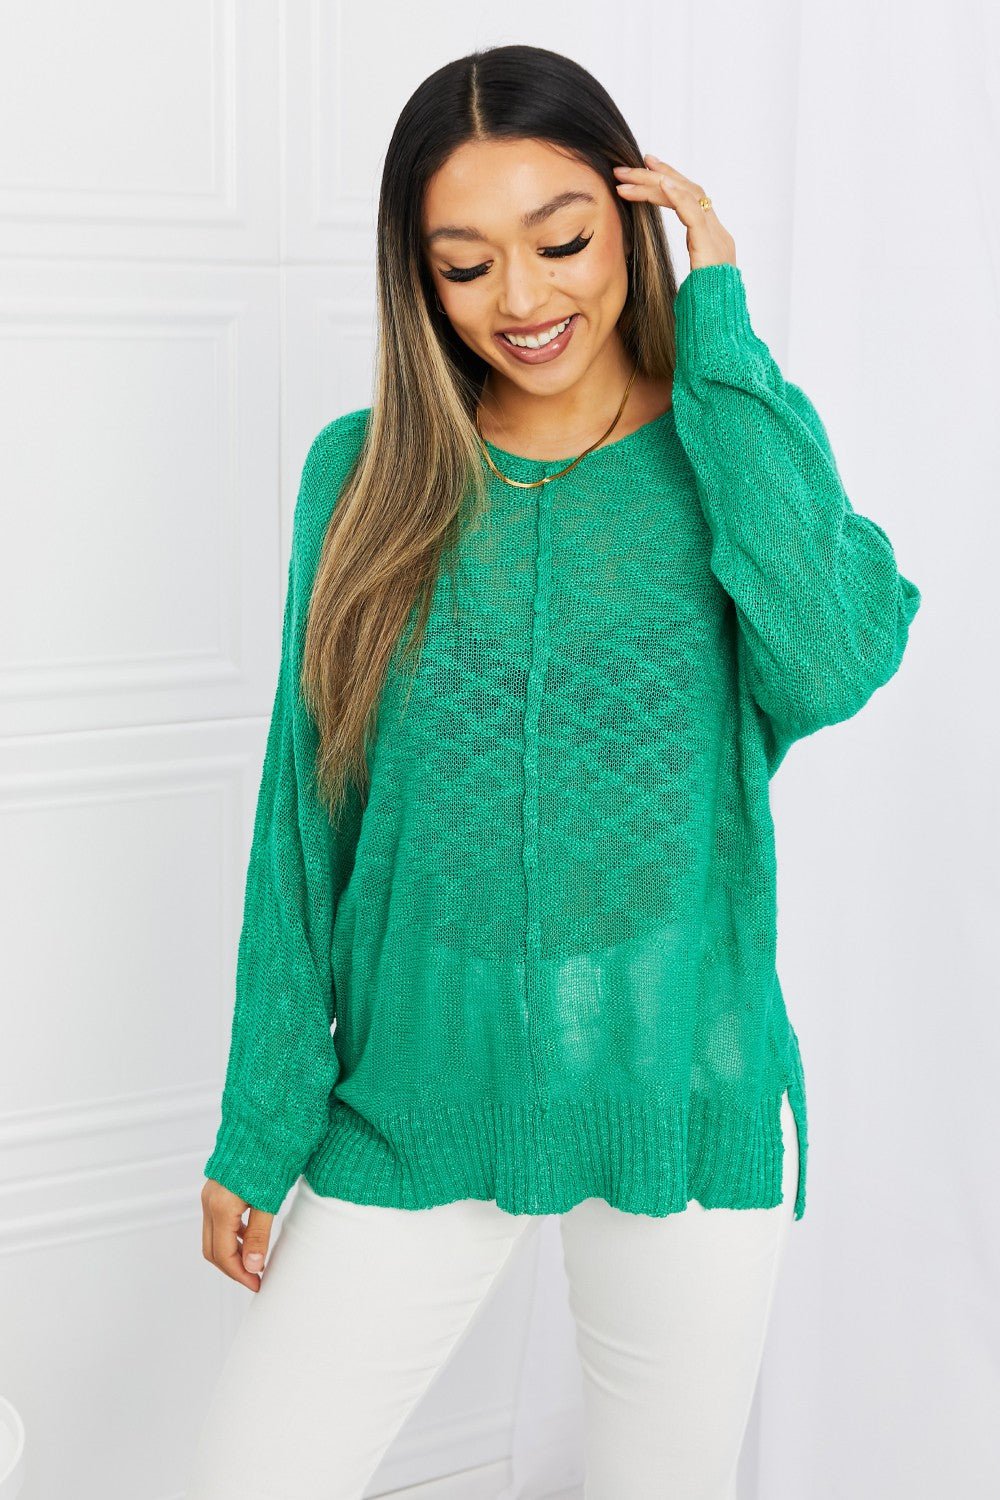 Exposed Seam Kelly Green Sweater Global Village Kailua Boutique